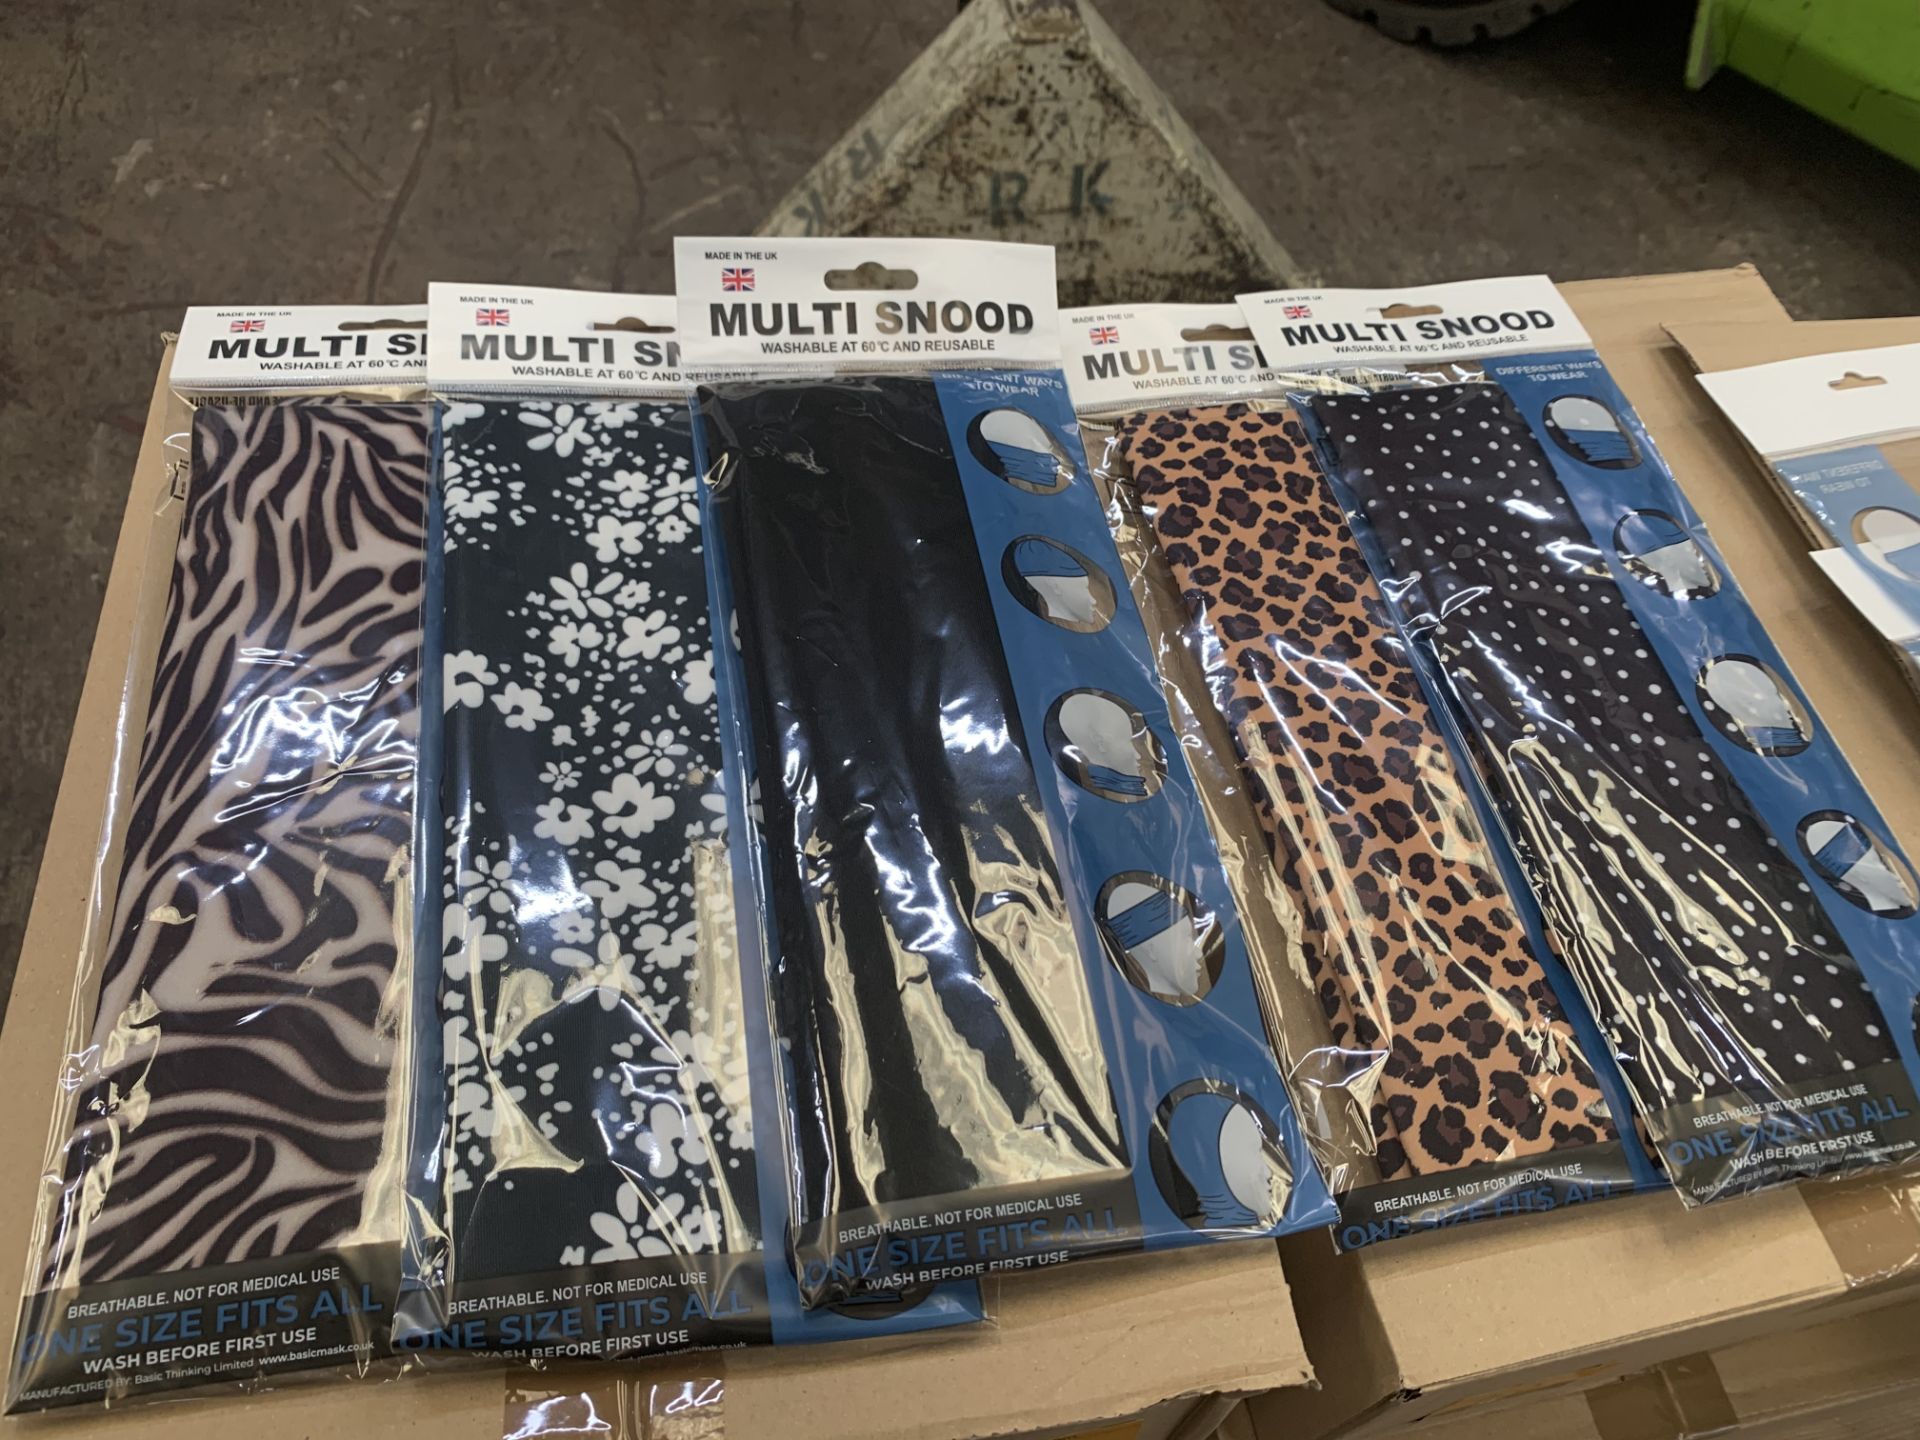 25 off multi snood face coverings, in 5 different designs - 5 each of 2 different animal prints, flo